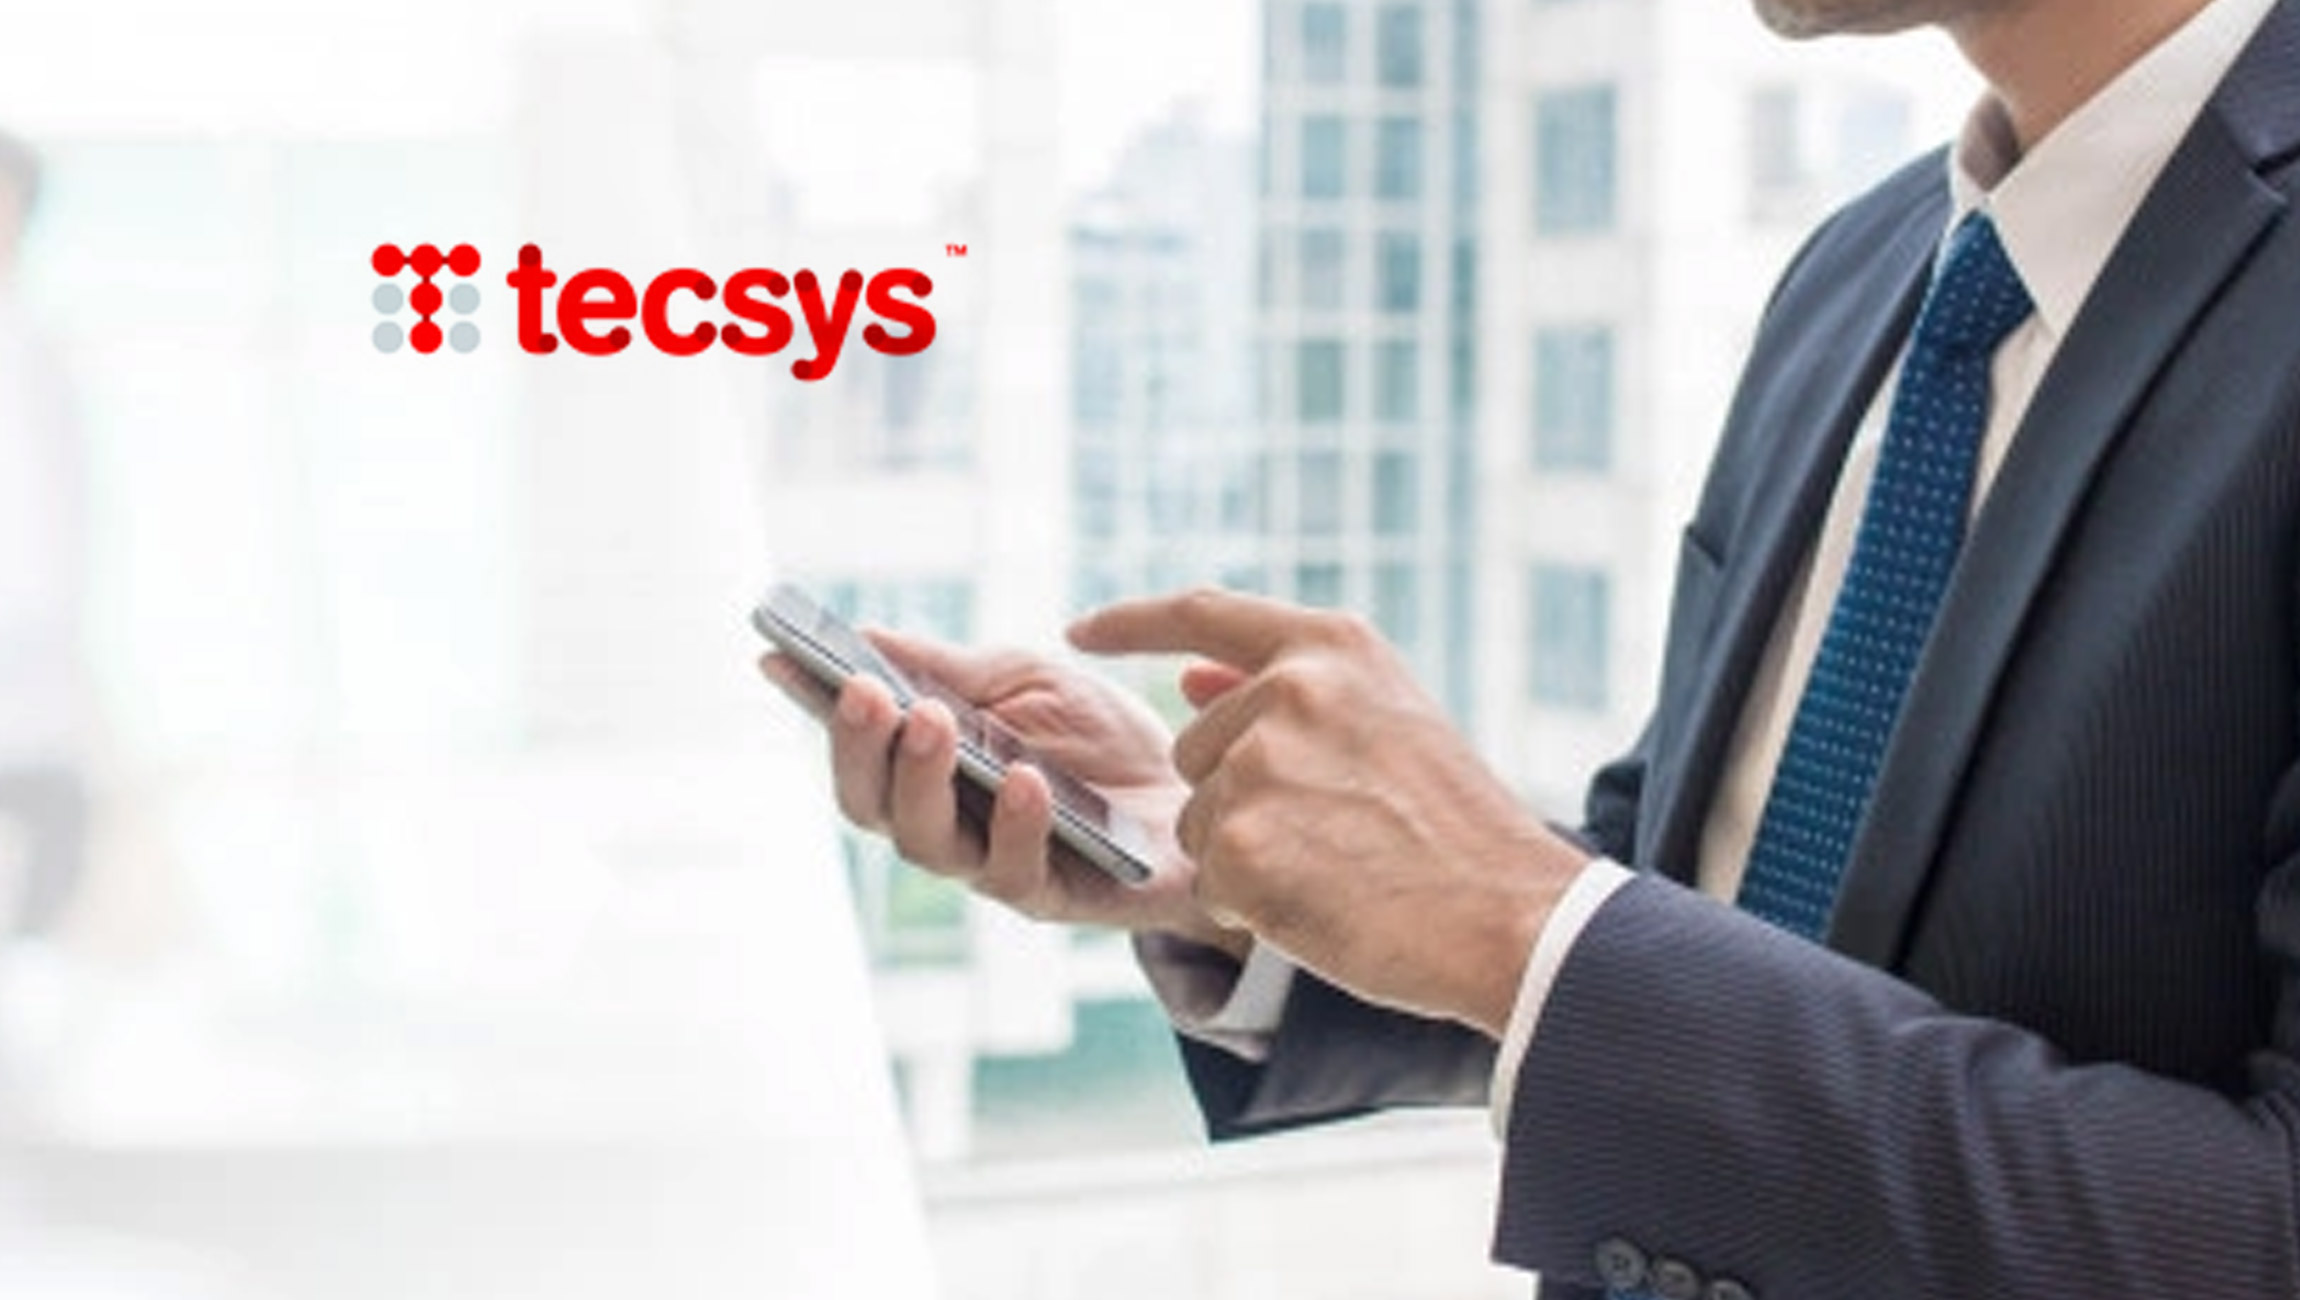 Leading Australian Fashion Chain Politix Leverages Tecsys' Unified Commerce Platform to Provide Customers a Faster and More Efficient Order Fulfillment Experience